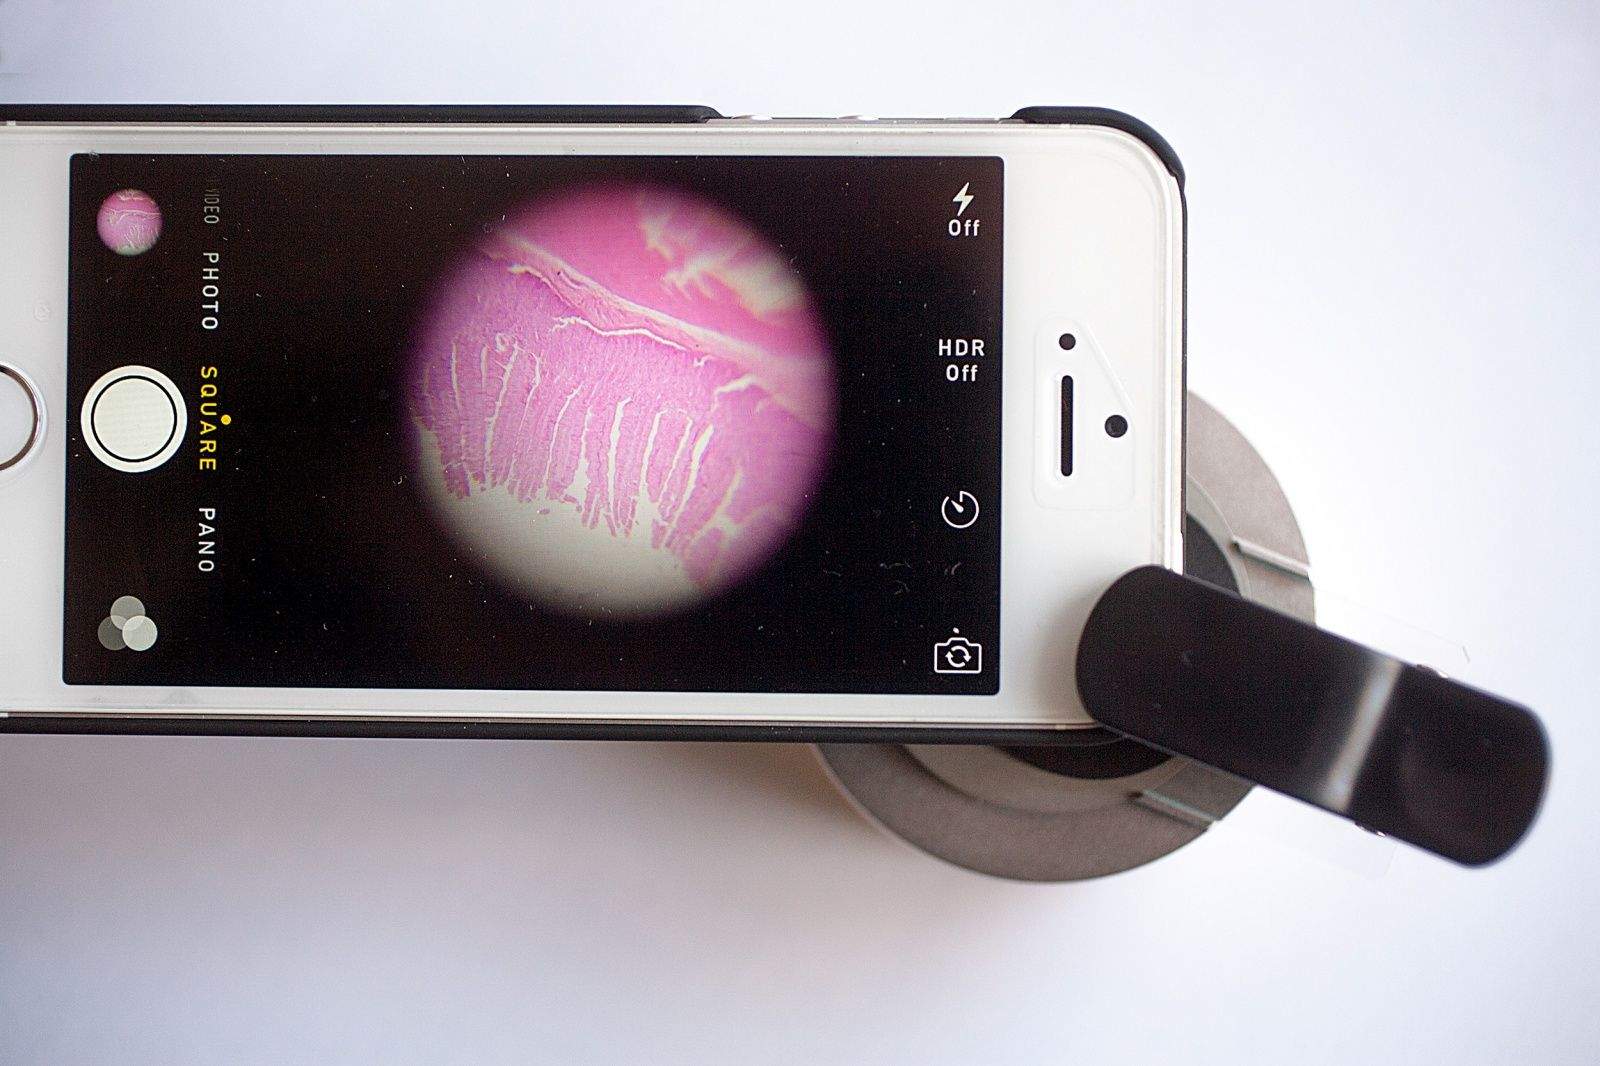 The uHandy kit turns an iPhone's camera app into a mobile microscope. Photo: David Pierini/Cult of Mac